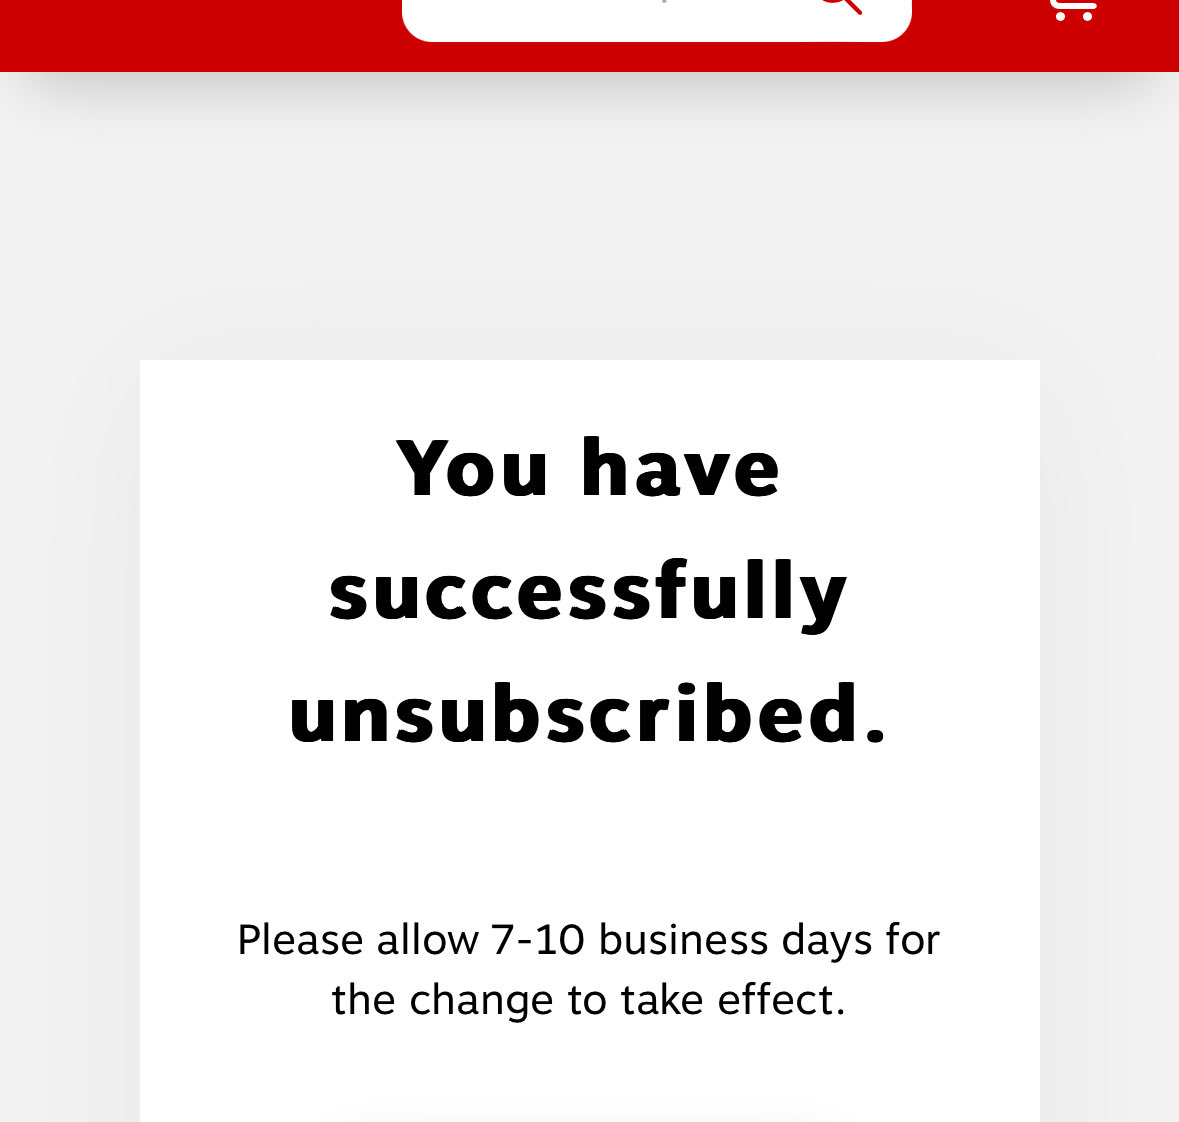 Why is it that when you go to a store and they take your email, by the time you get home, they have sent 42 emails, but takes “7-10 business days” to unsubscribe???